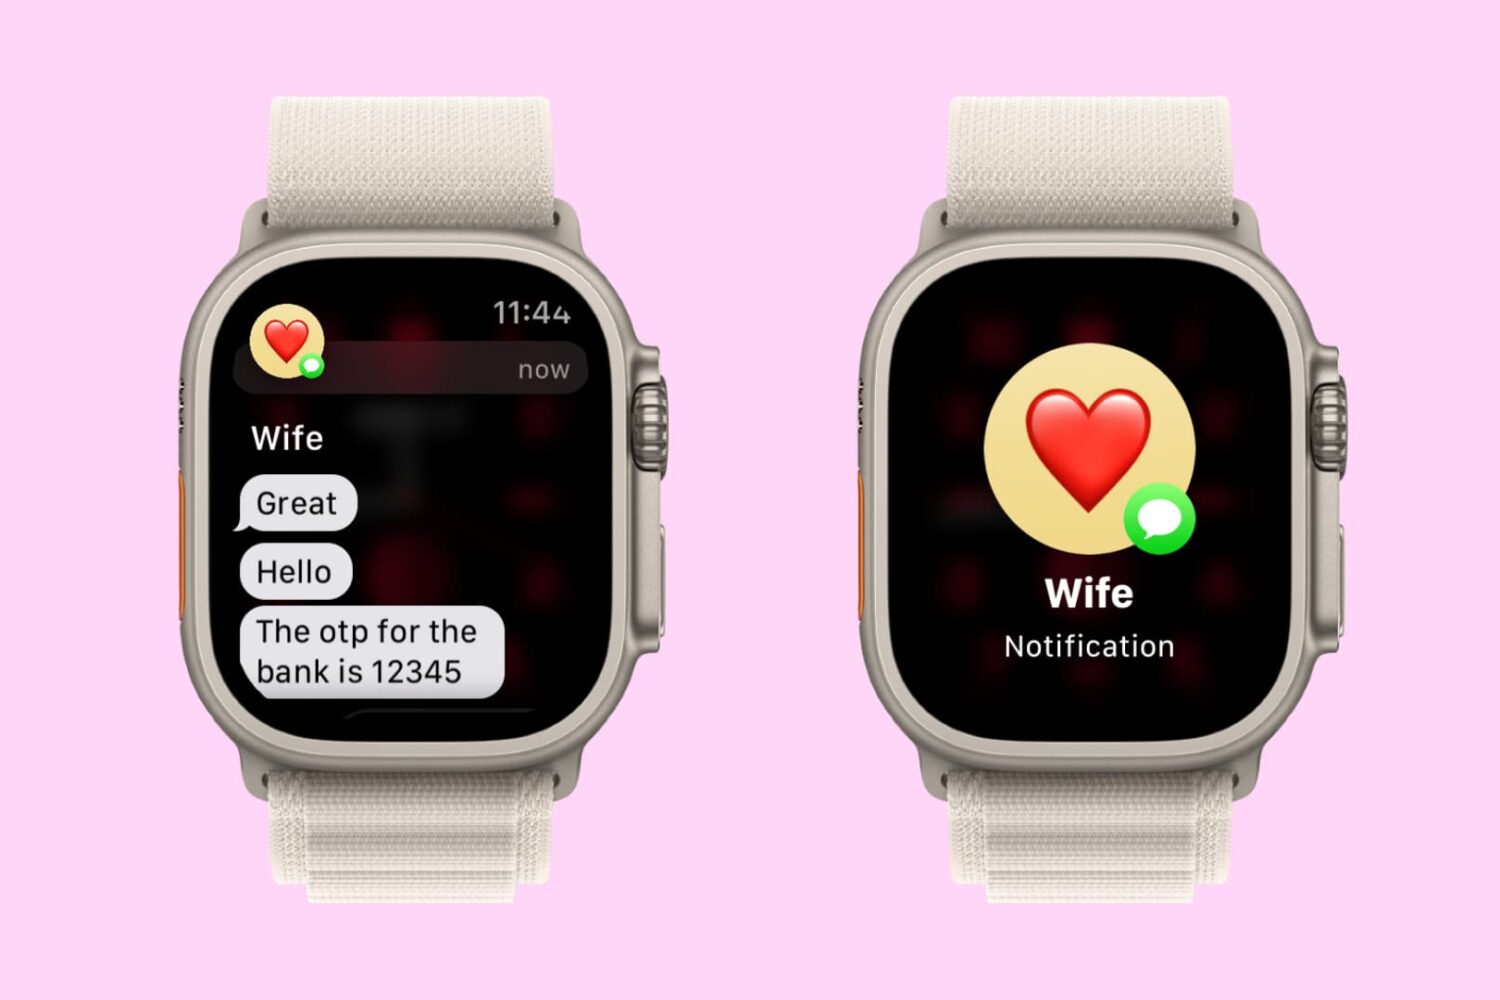 Normal and private notifications on Apple Watch